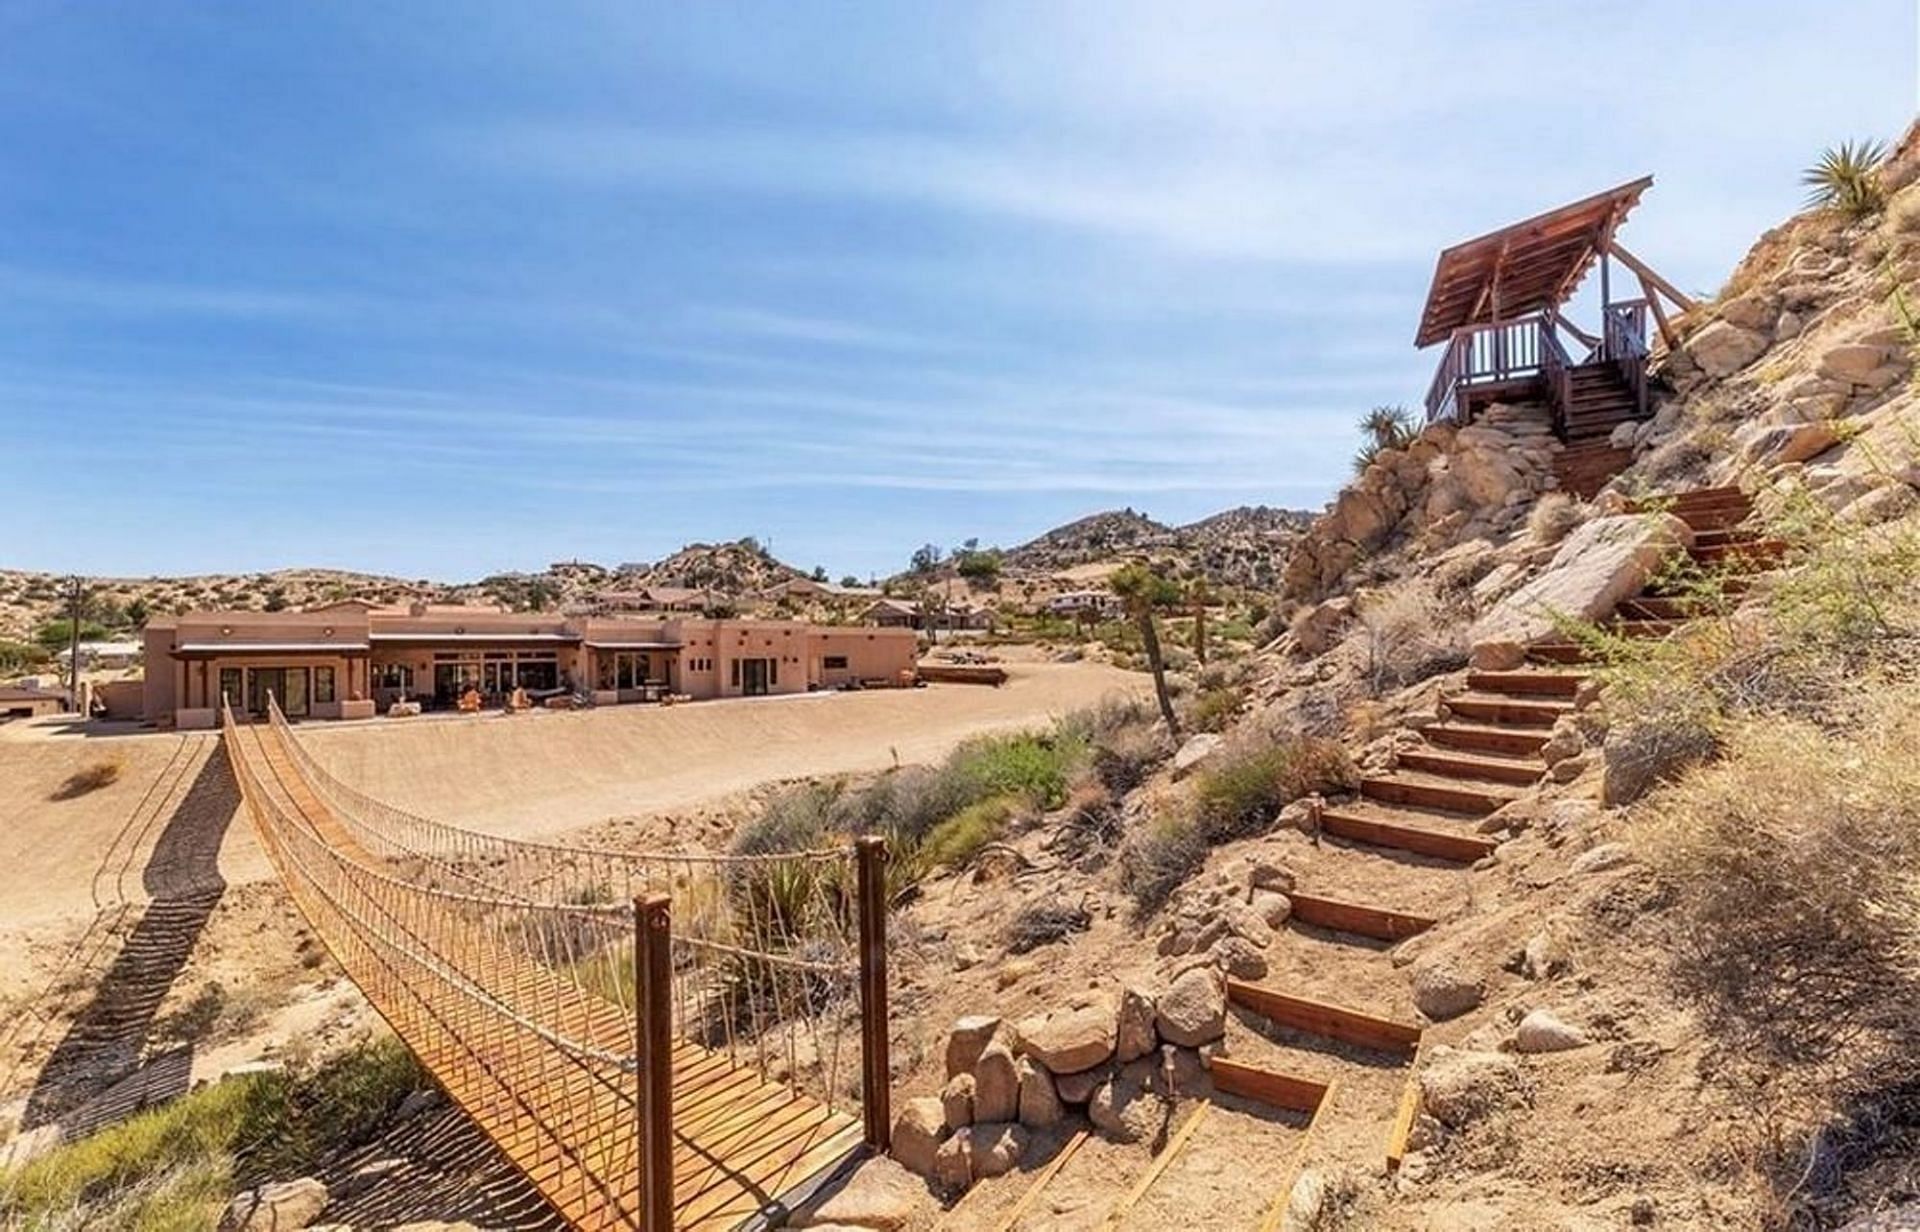 Inside the Yucca Valley residence (Image via MLS)